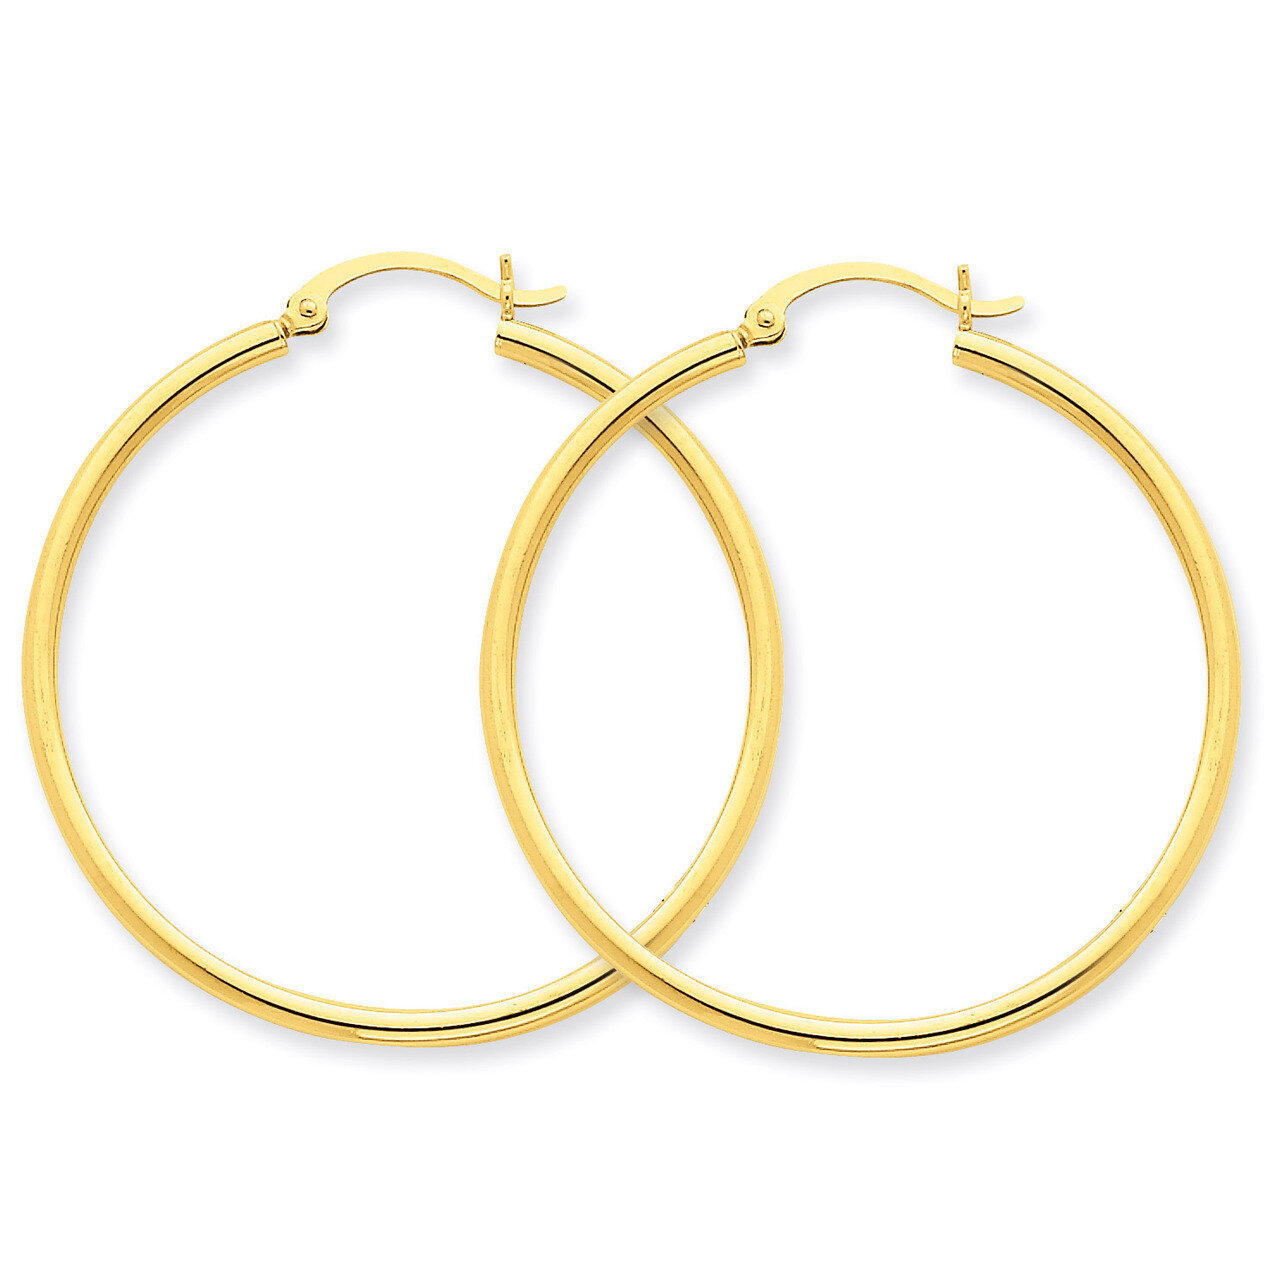 2mm Round Hoop Earrings 14k Gold Polished T919